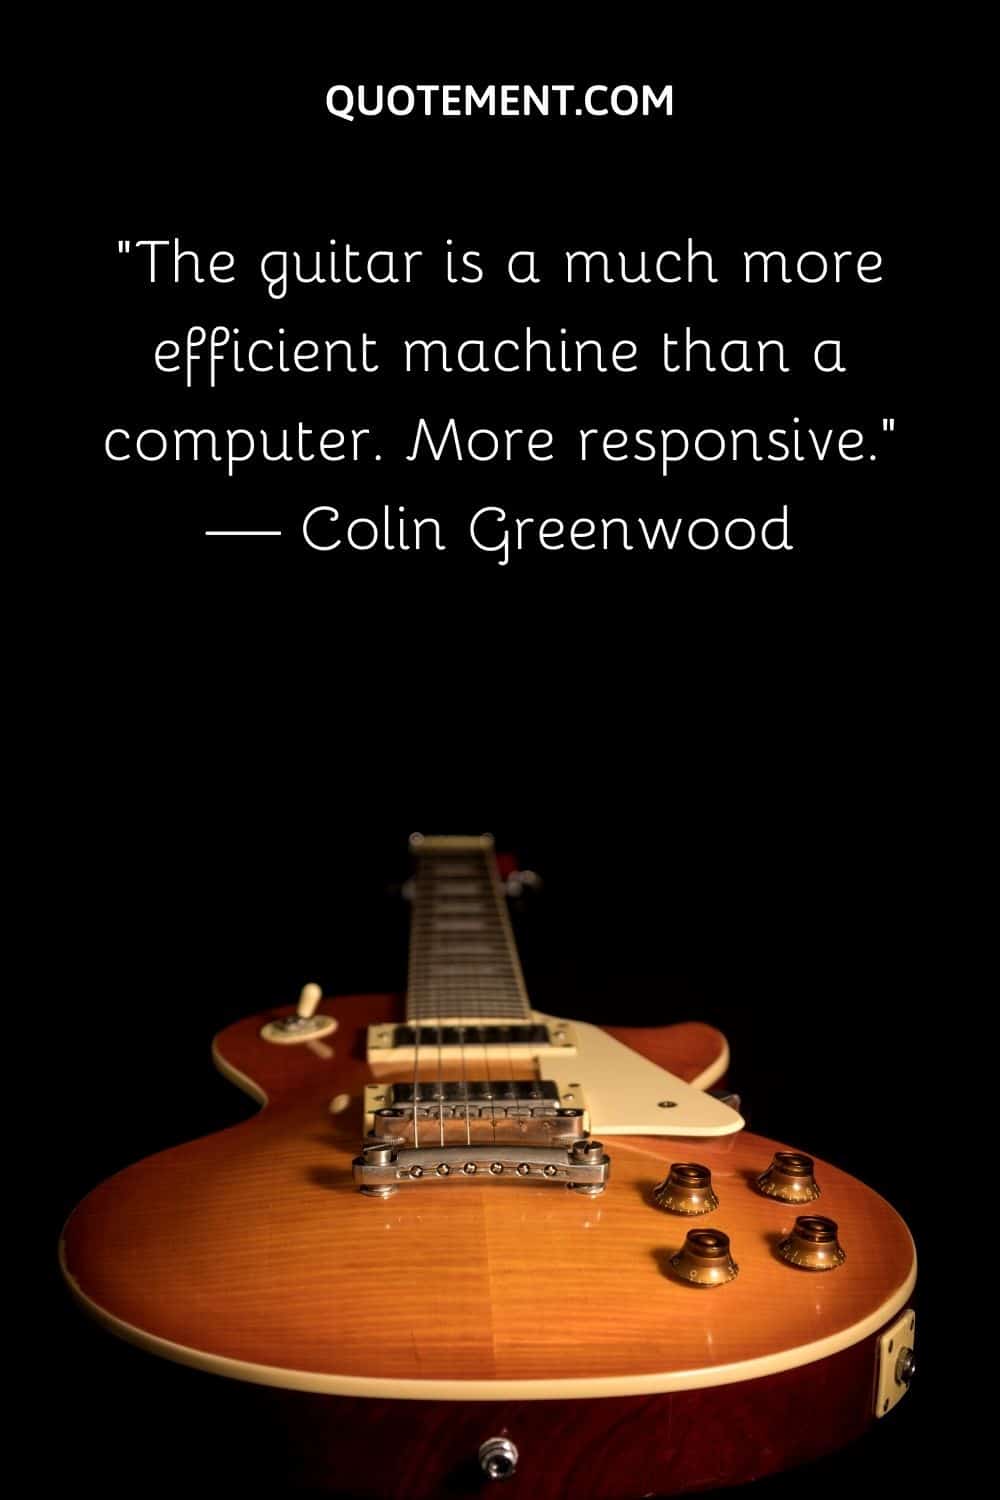 The guitar is a much more efficient machine than a computer.